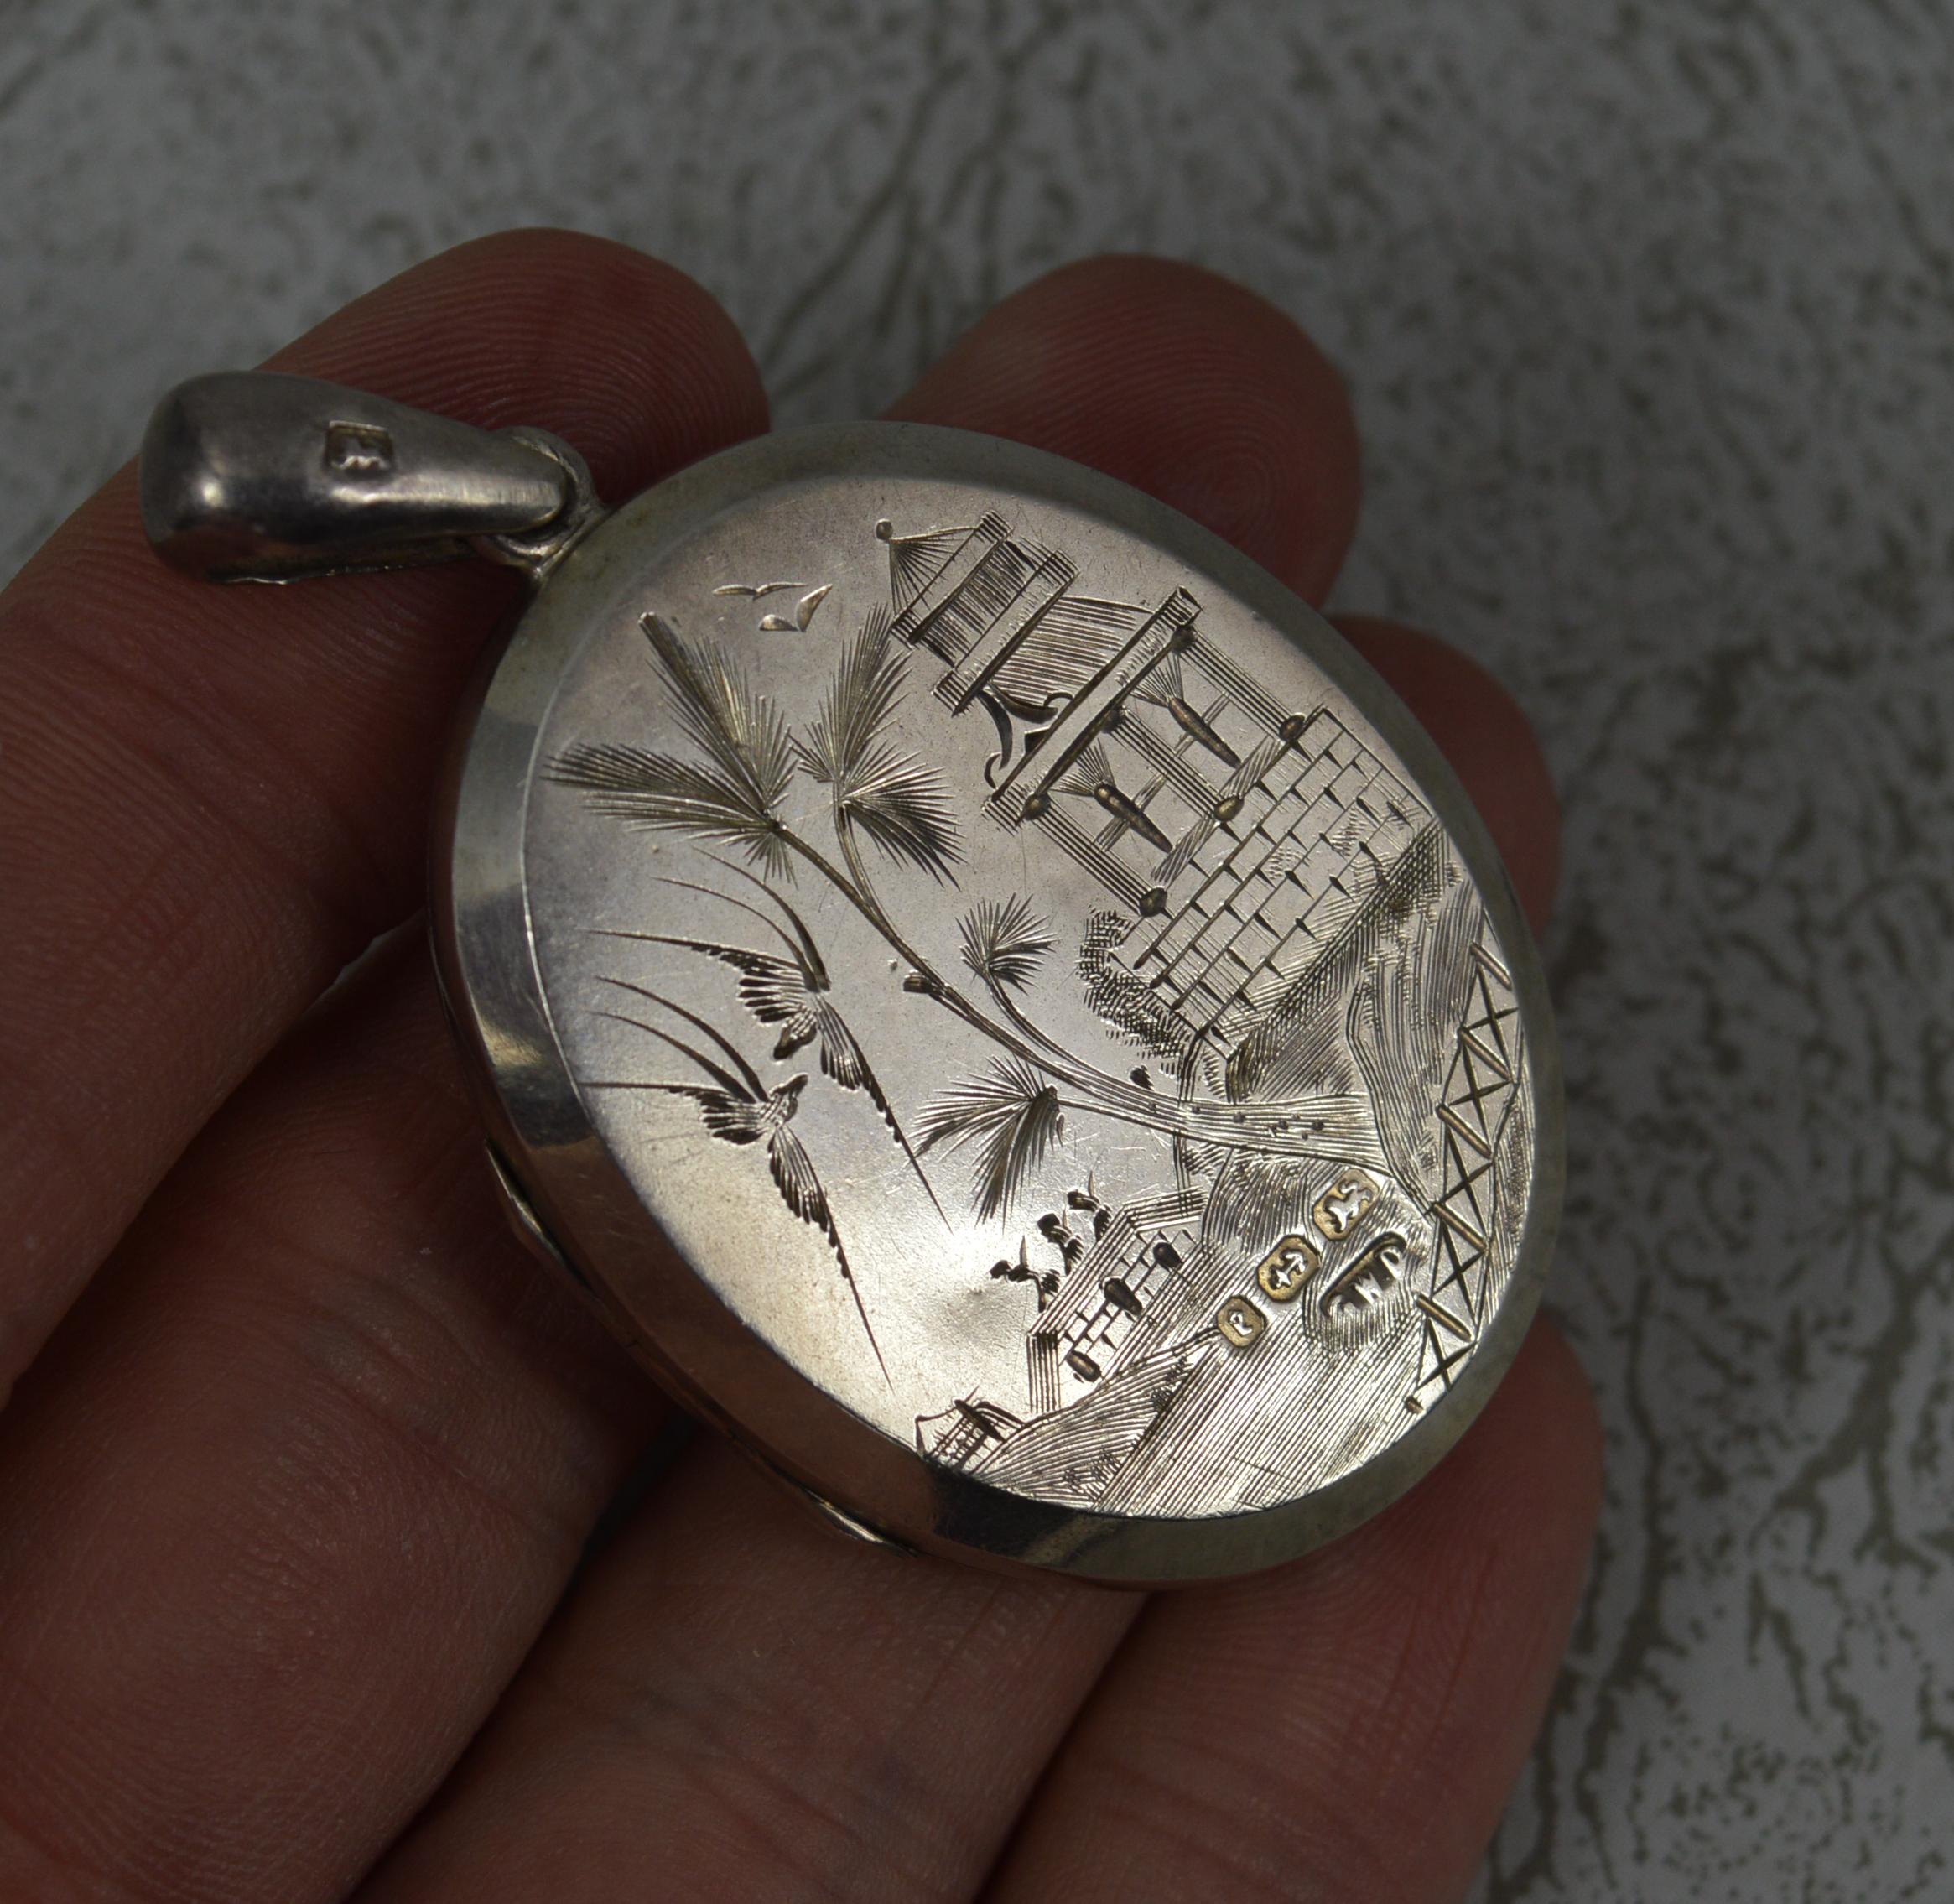 A Victorian period ladies solid silver locket.
Stylish piece with finely engraved sides.

Hallmarks ; English hallmarks to side
Weight ; 14.4 grams
Size ; 32.5mm x 40.5mm without bale approx
Condition ; Excellent. Crisp design. No dents or issues.